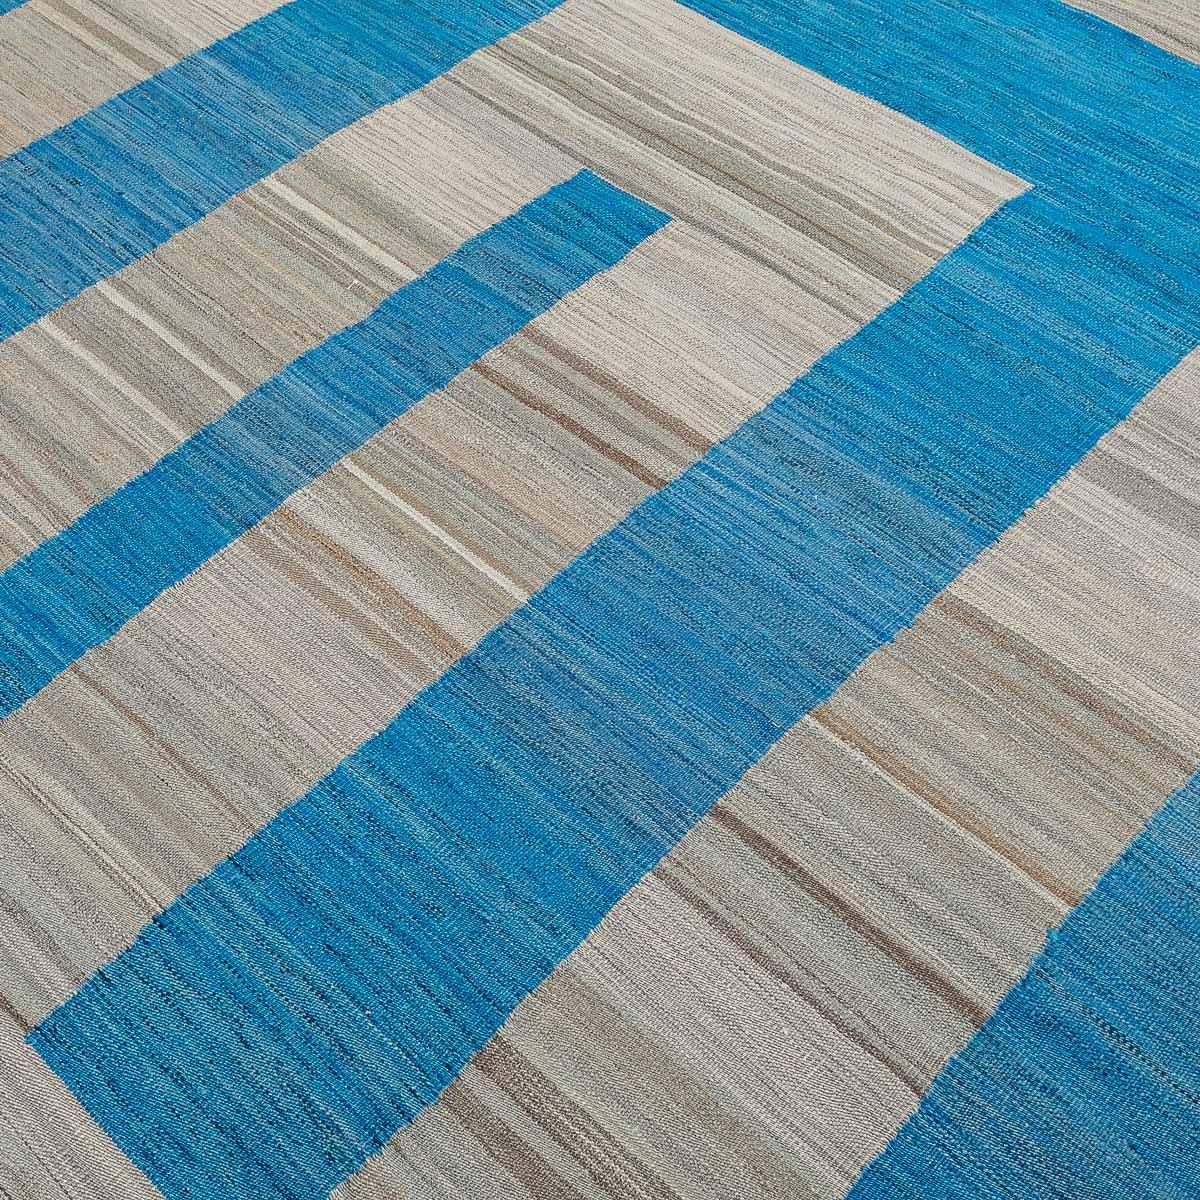 Contemporary Handmade Flat-Weave Kilim Blue and Gray Wool Geometrical Design. 2.90 x 2.05 m. For Sale